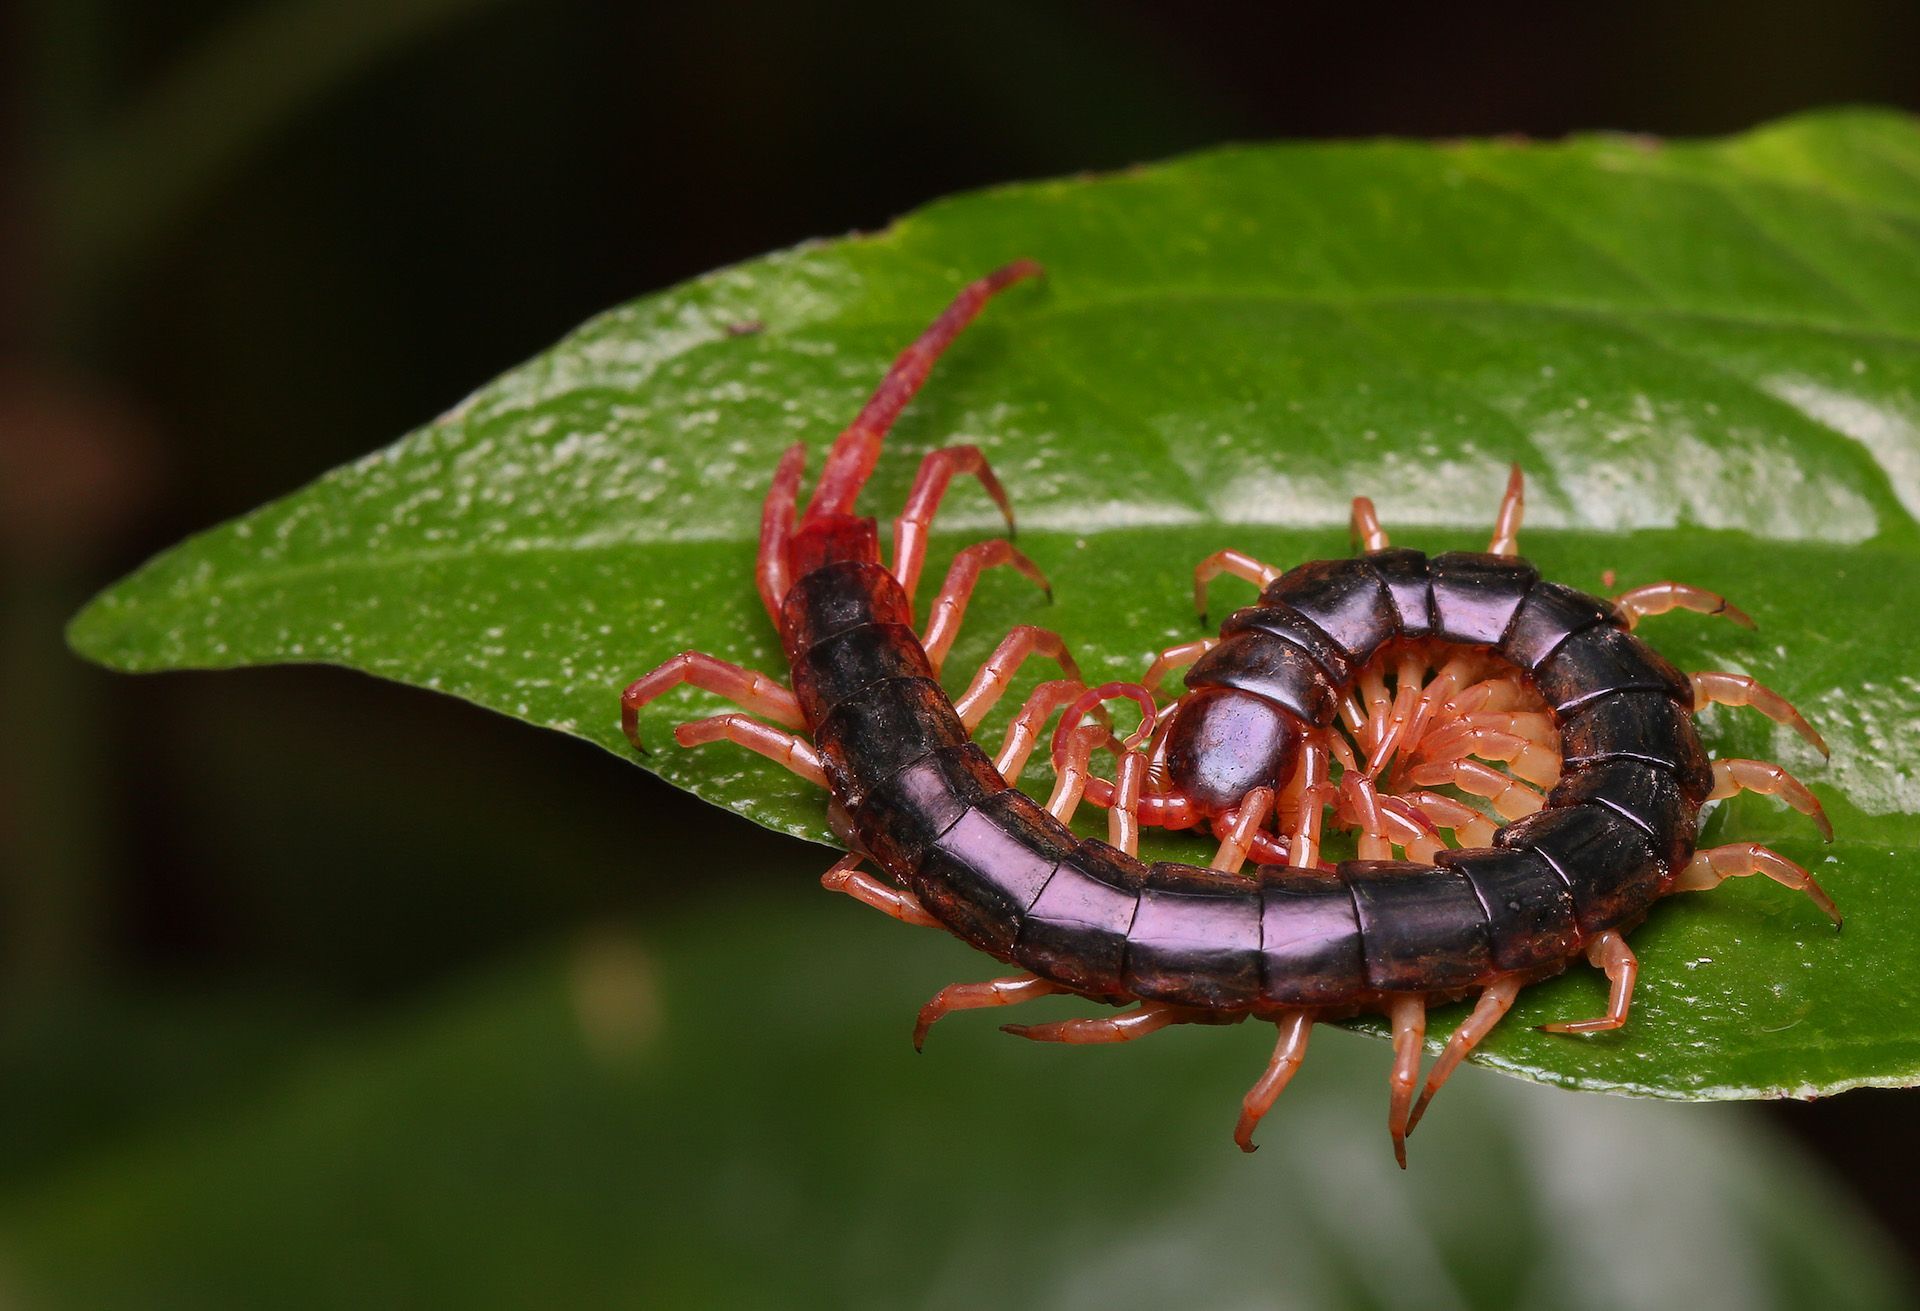 A centipede is sitting on top of a green leaf